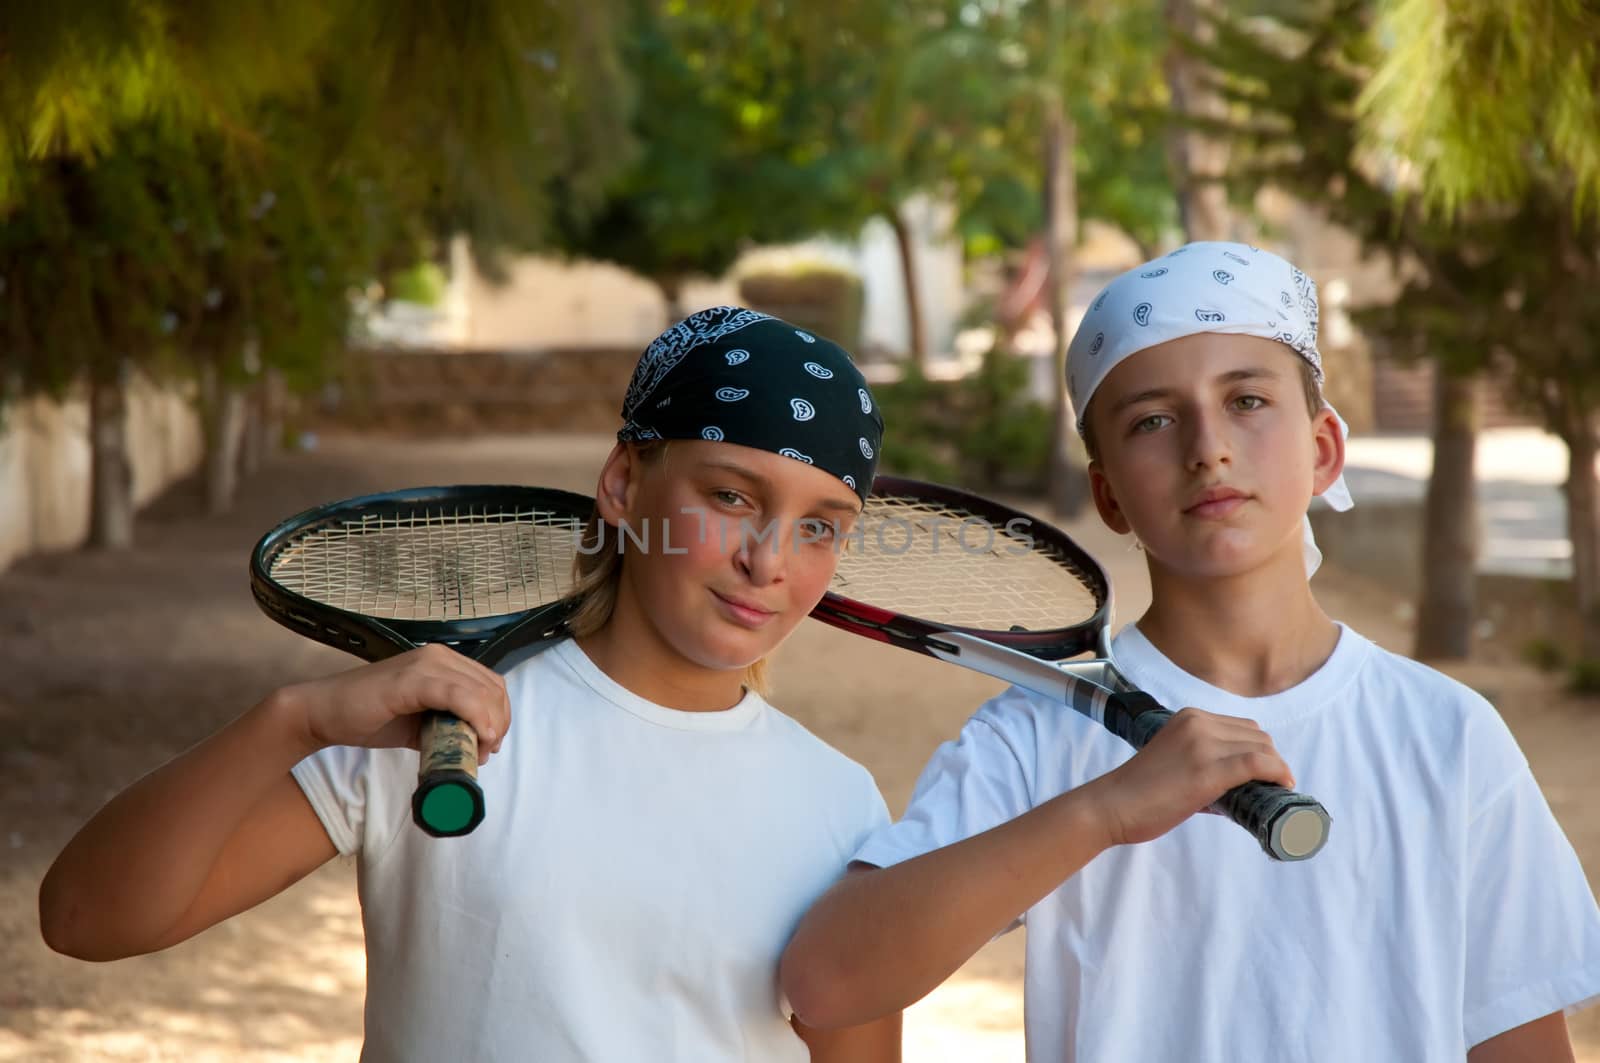 Two young boys with tennis racket . by LarisaP